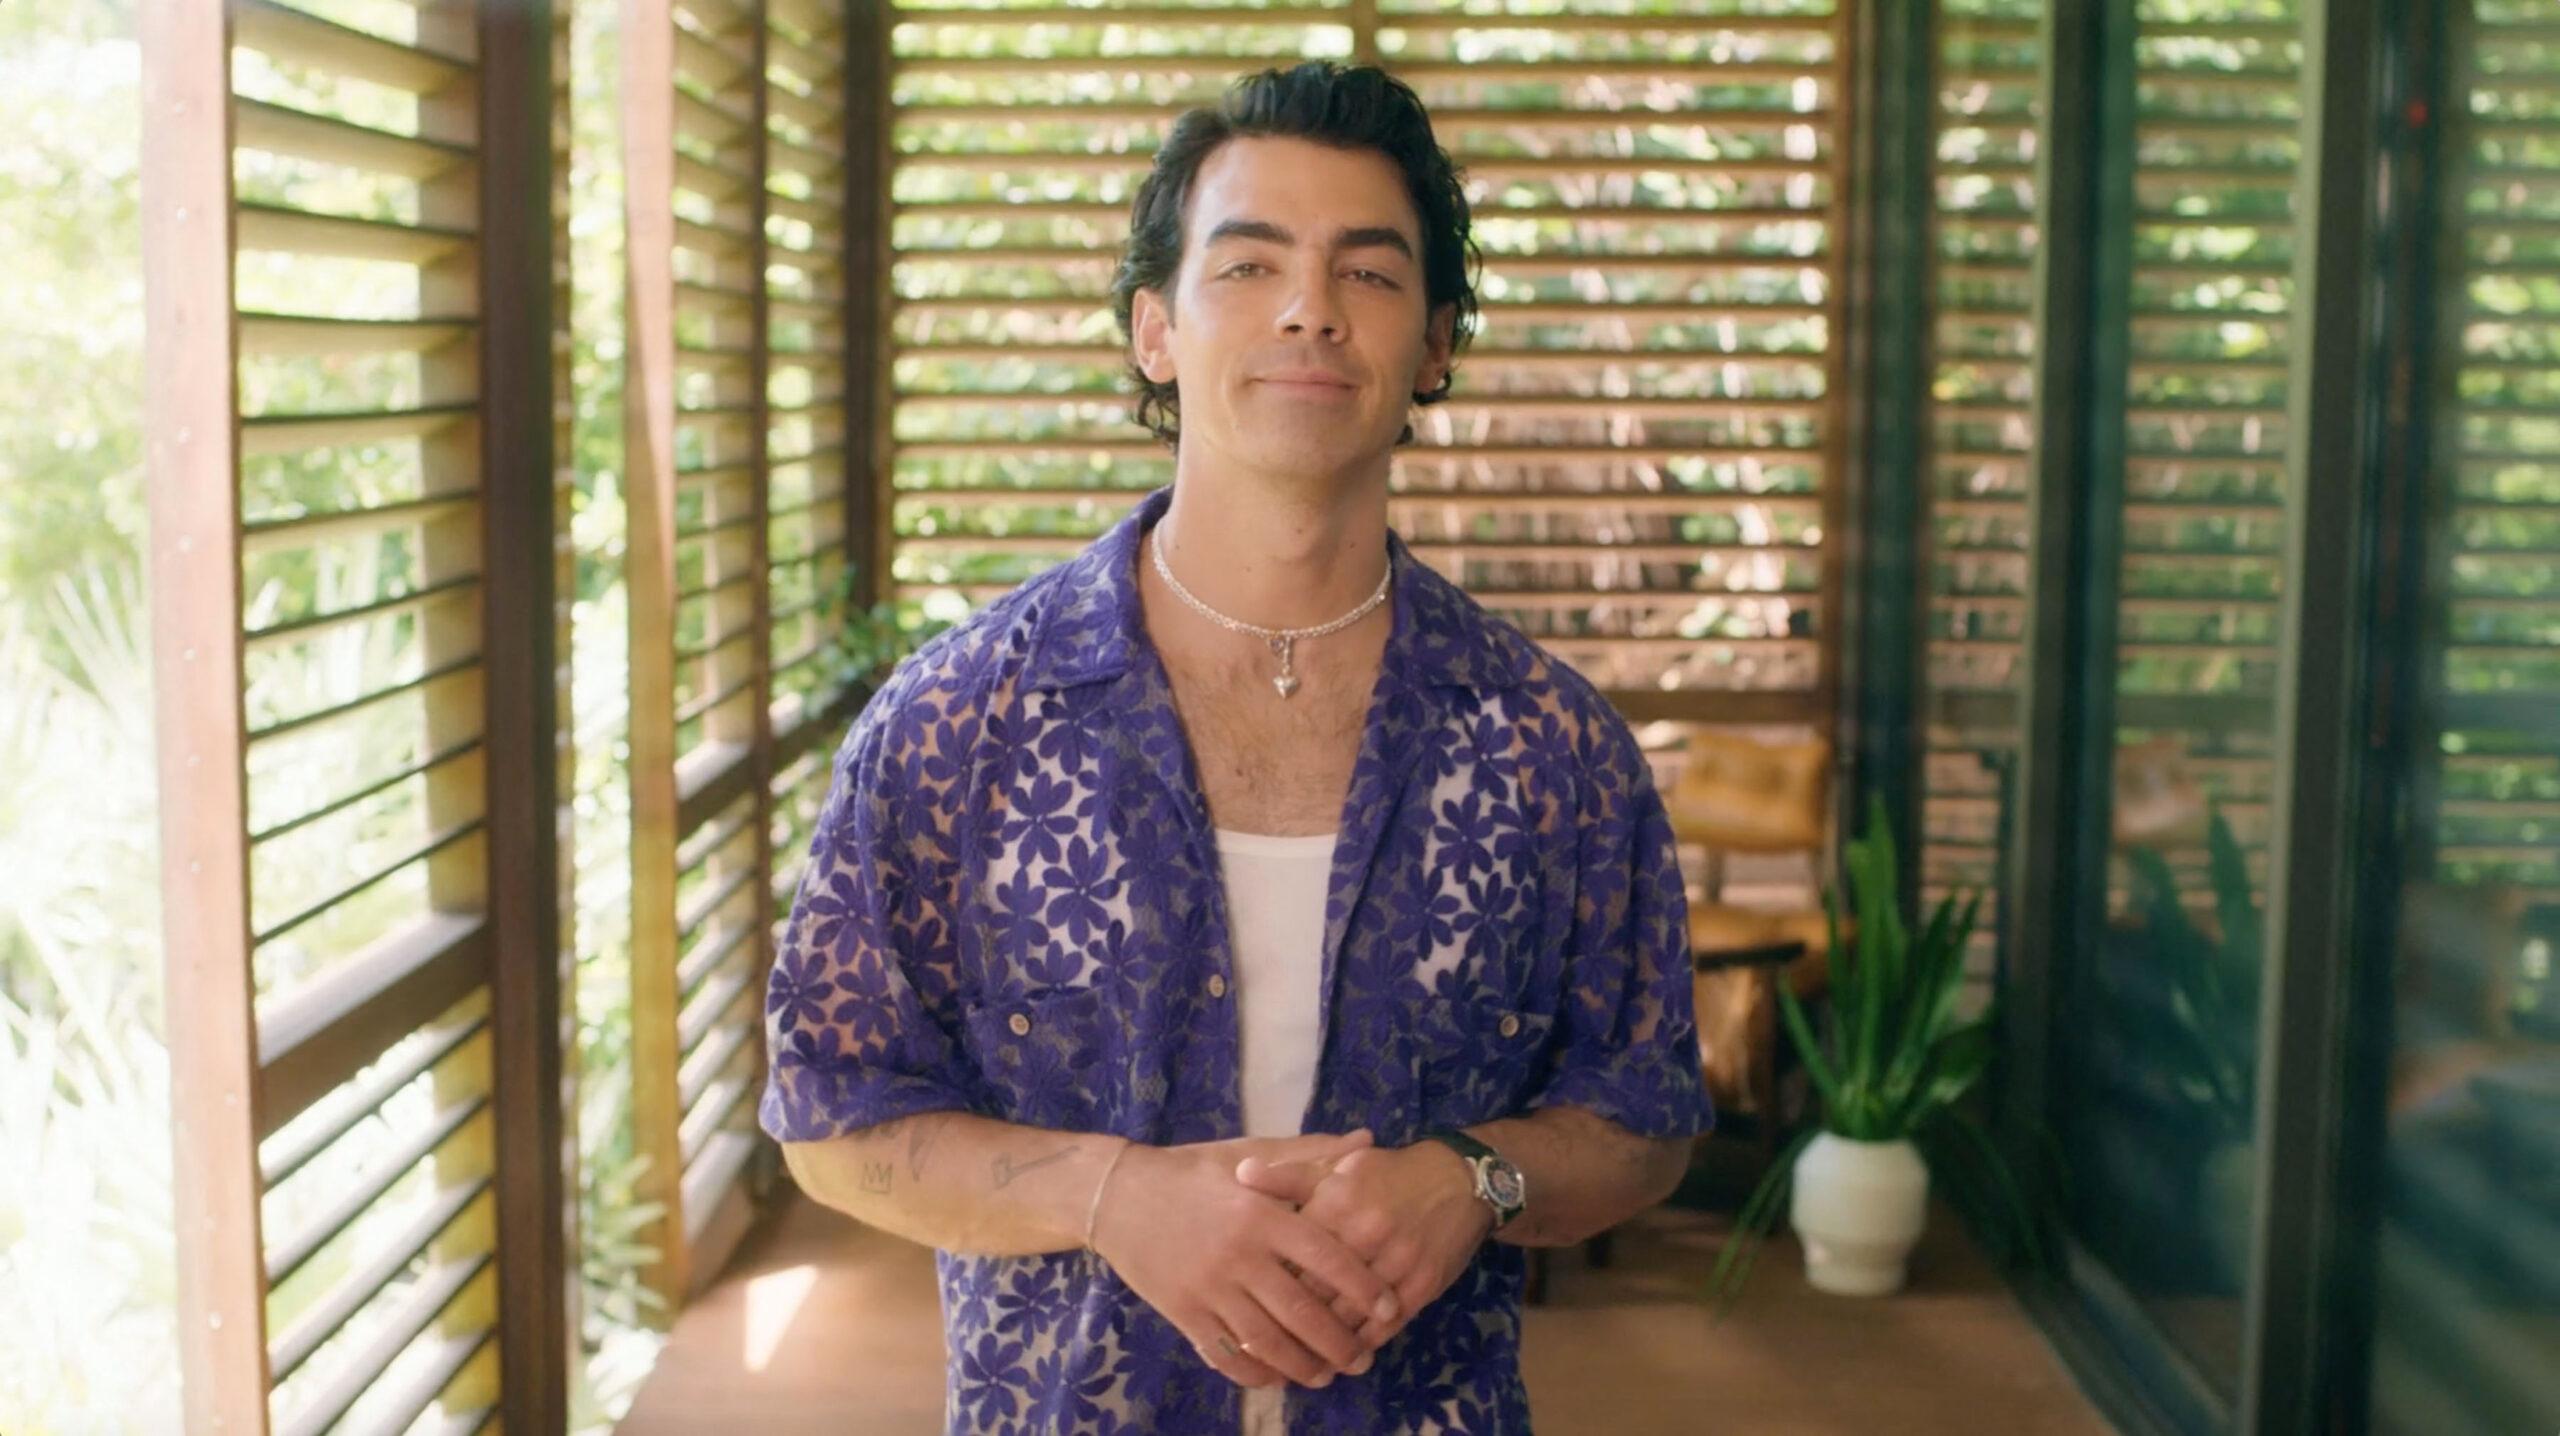 Joe Jonas reveals he uses anti-aging injectables to stop wrinkles as he is named new brand partner of smart toxin Xeomin